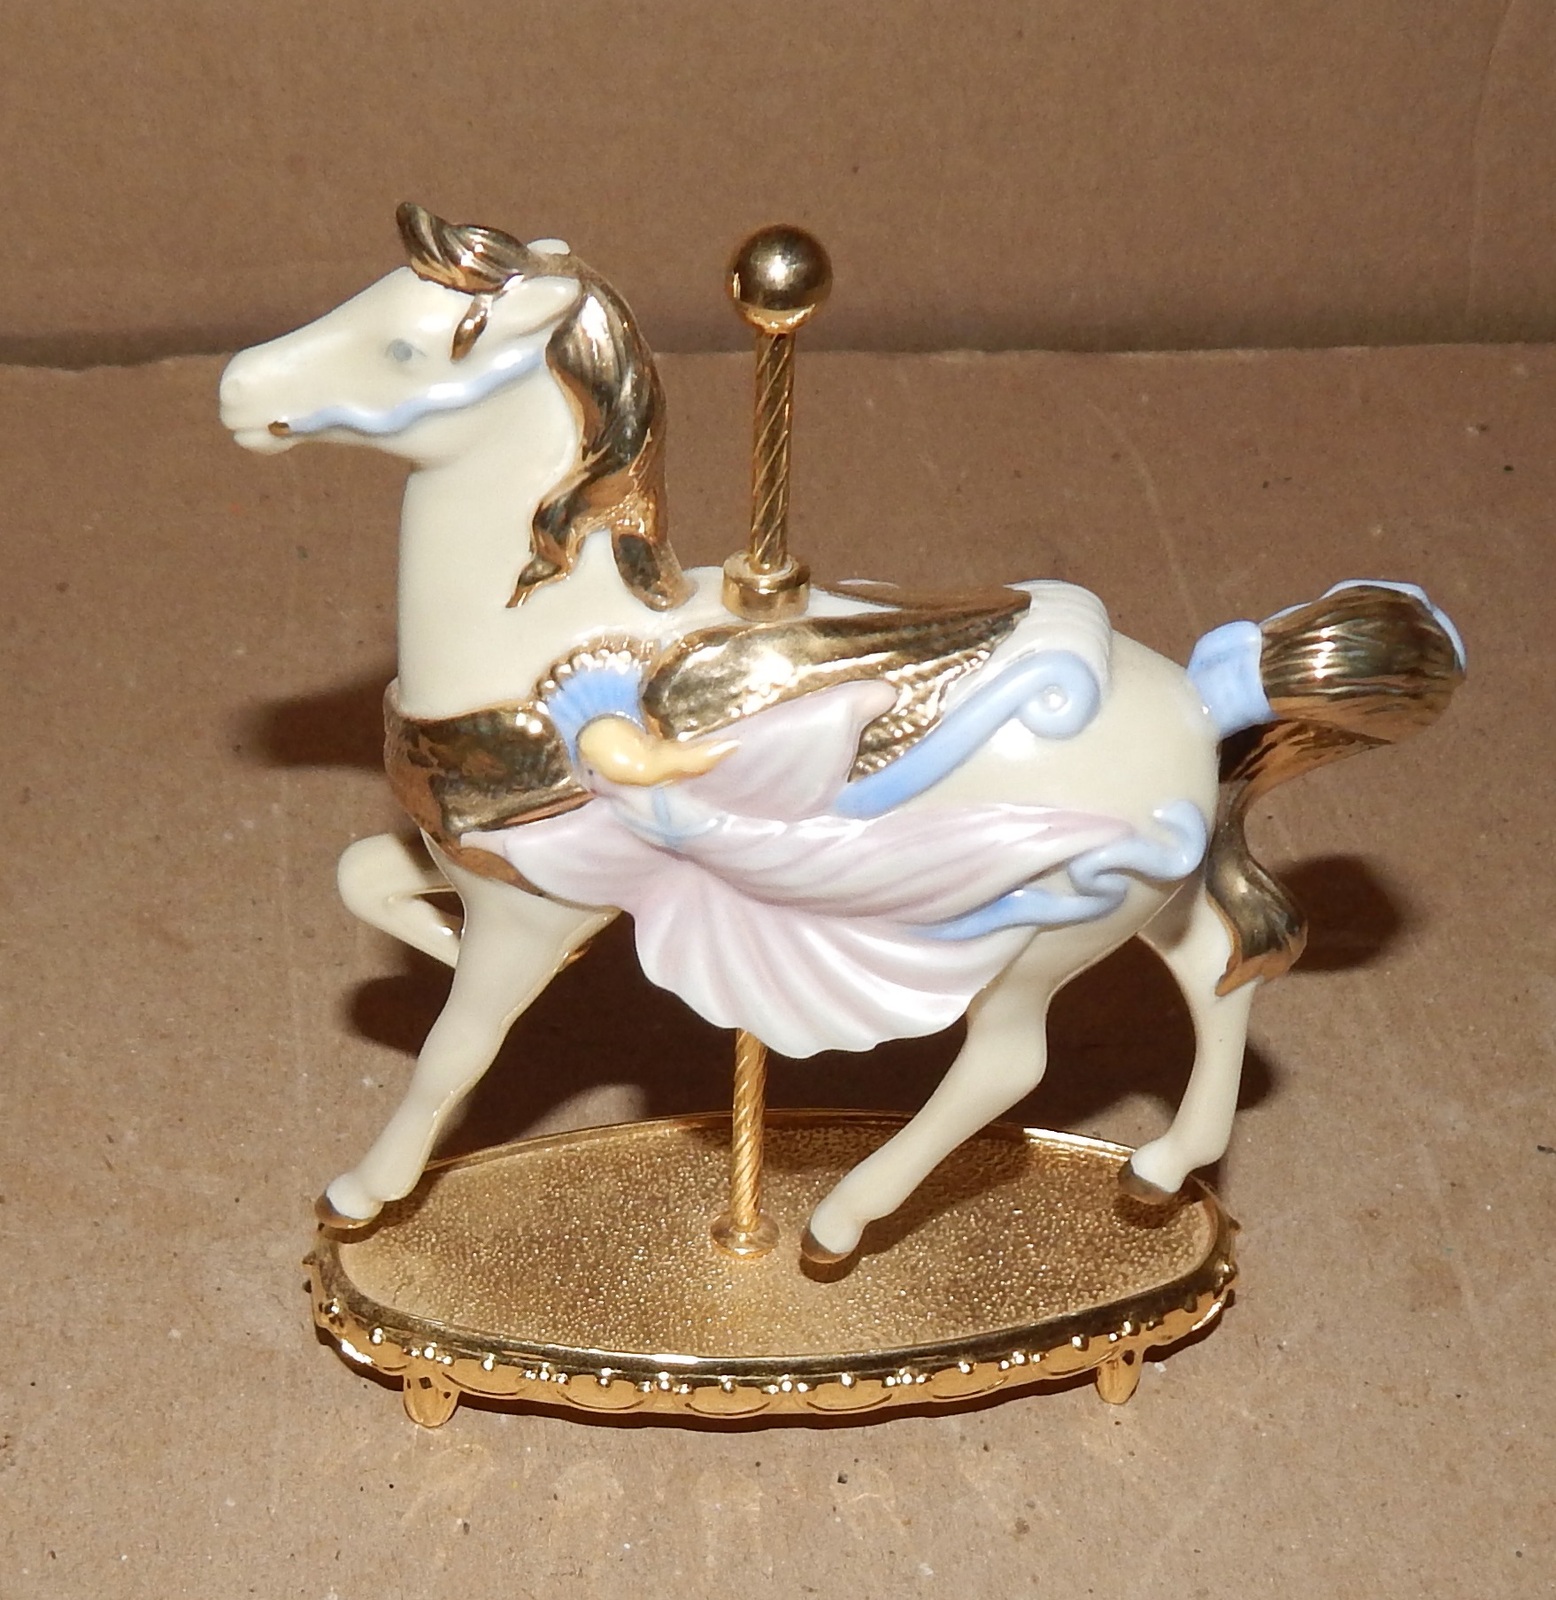 Primary image for Franklin Mint Limited Carousel Horses Sculpture Collection YouChoose Type 186U-4